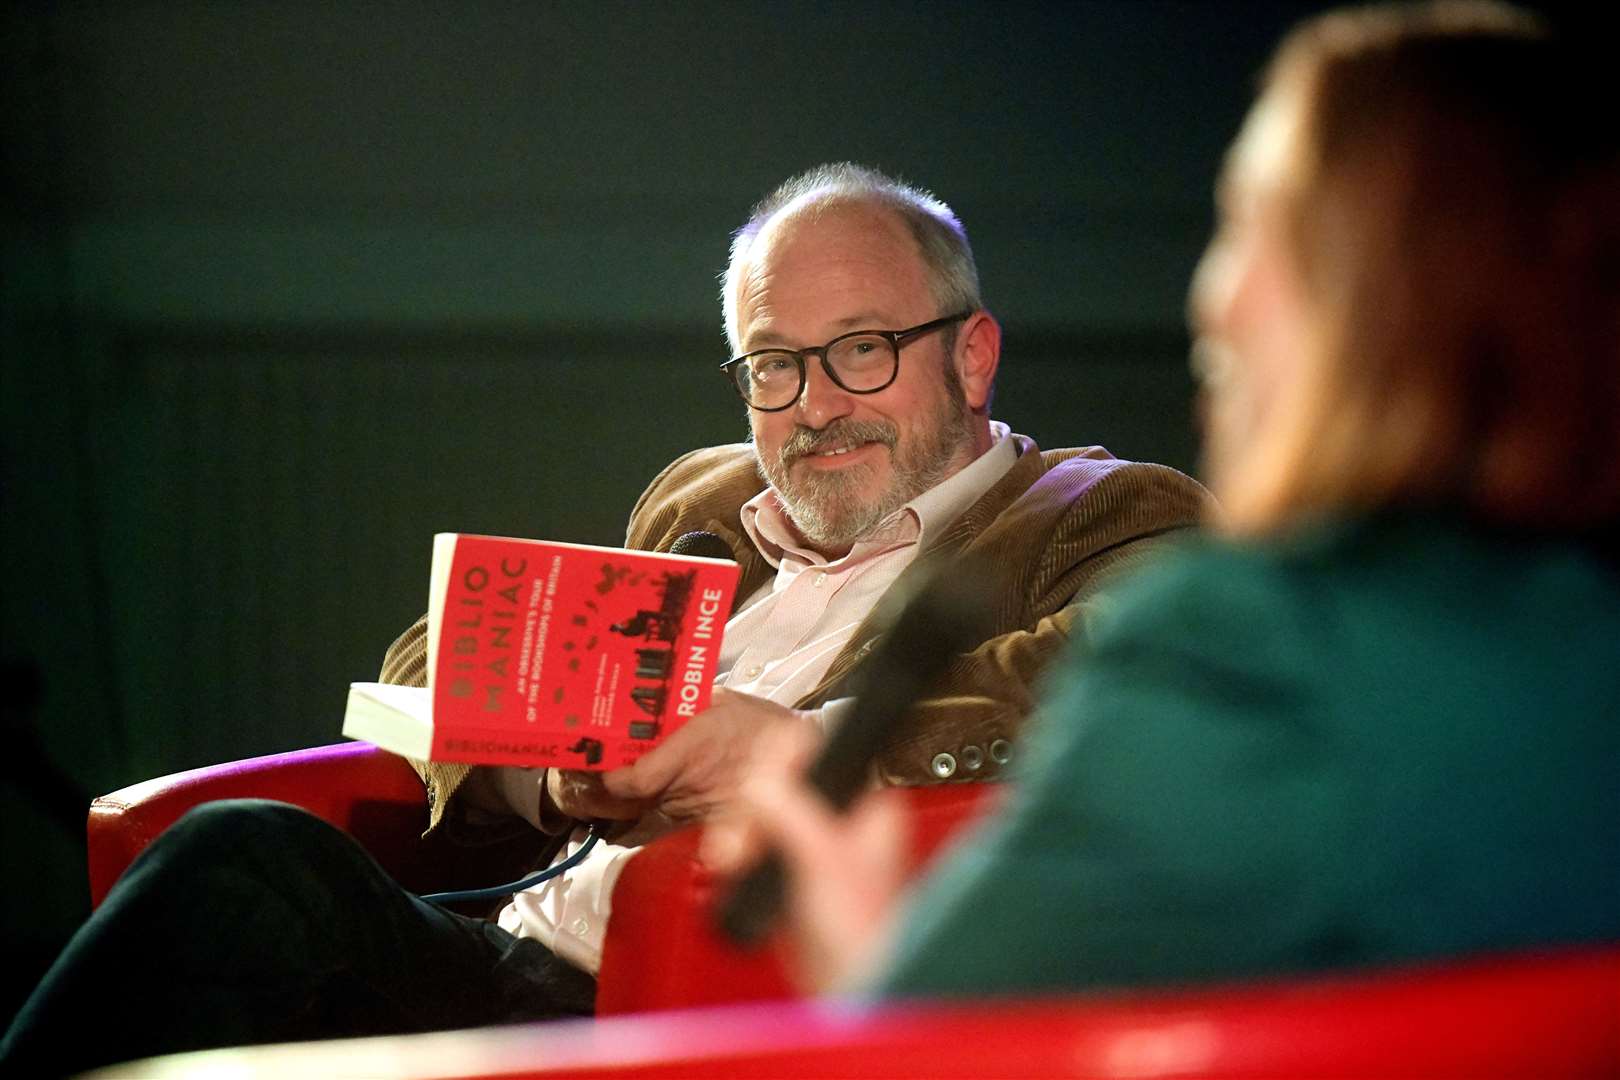 A first for Robin Ince, reading from his own book at Saturday night's NBF event. Picture James Mackenzie